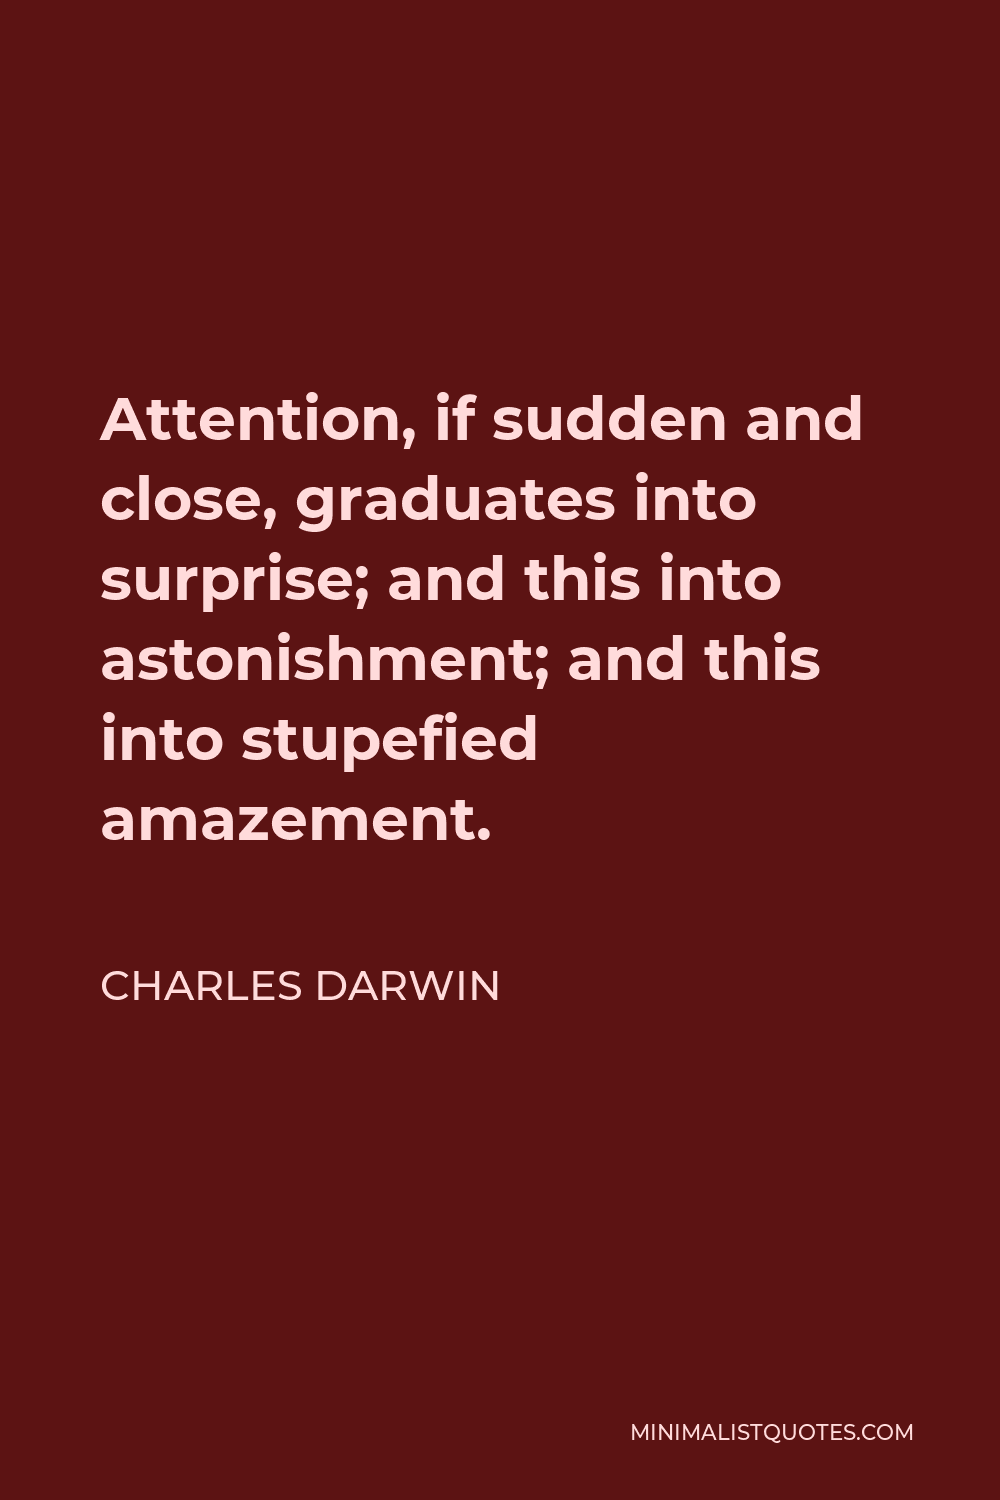 Charles Darwin Quote - Attention, if sudden and close, graduates into surprise; and this into astonishment; and this into stupefied amazement.